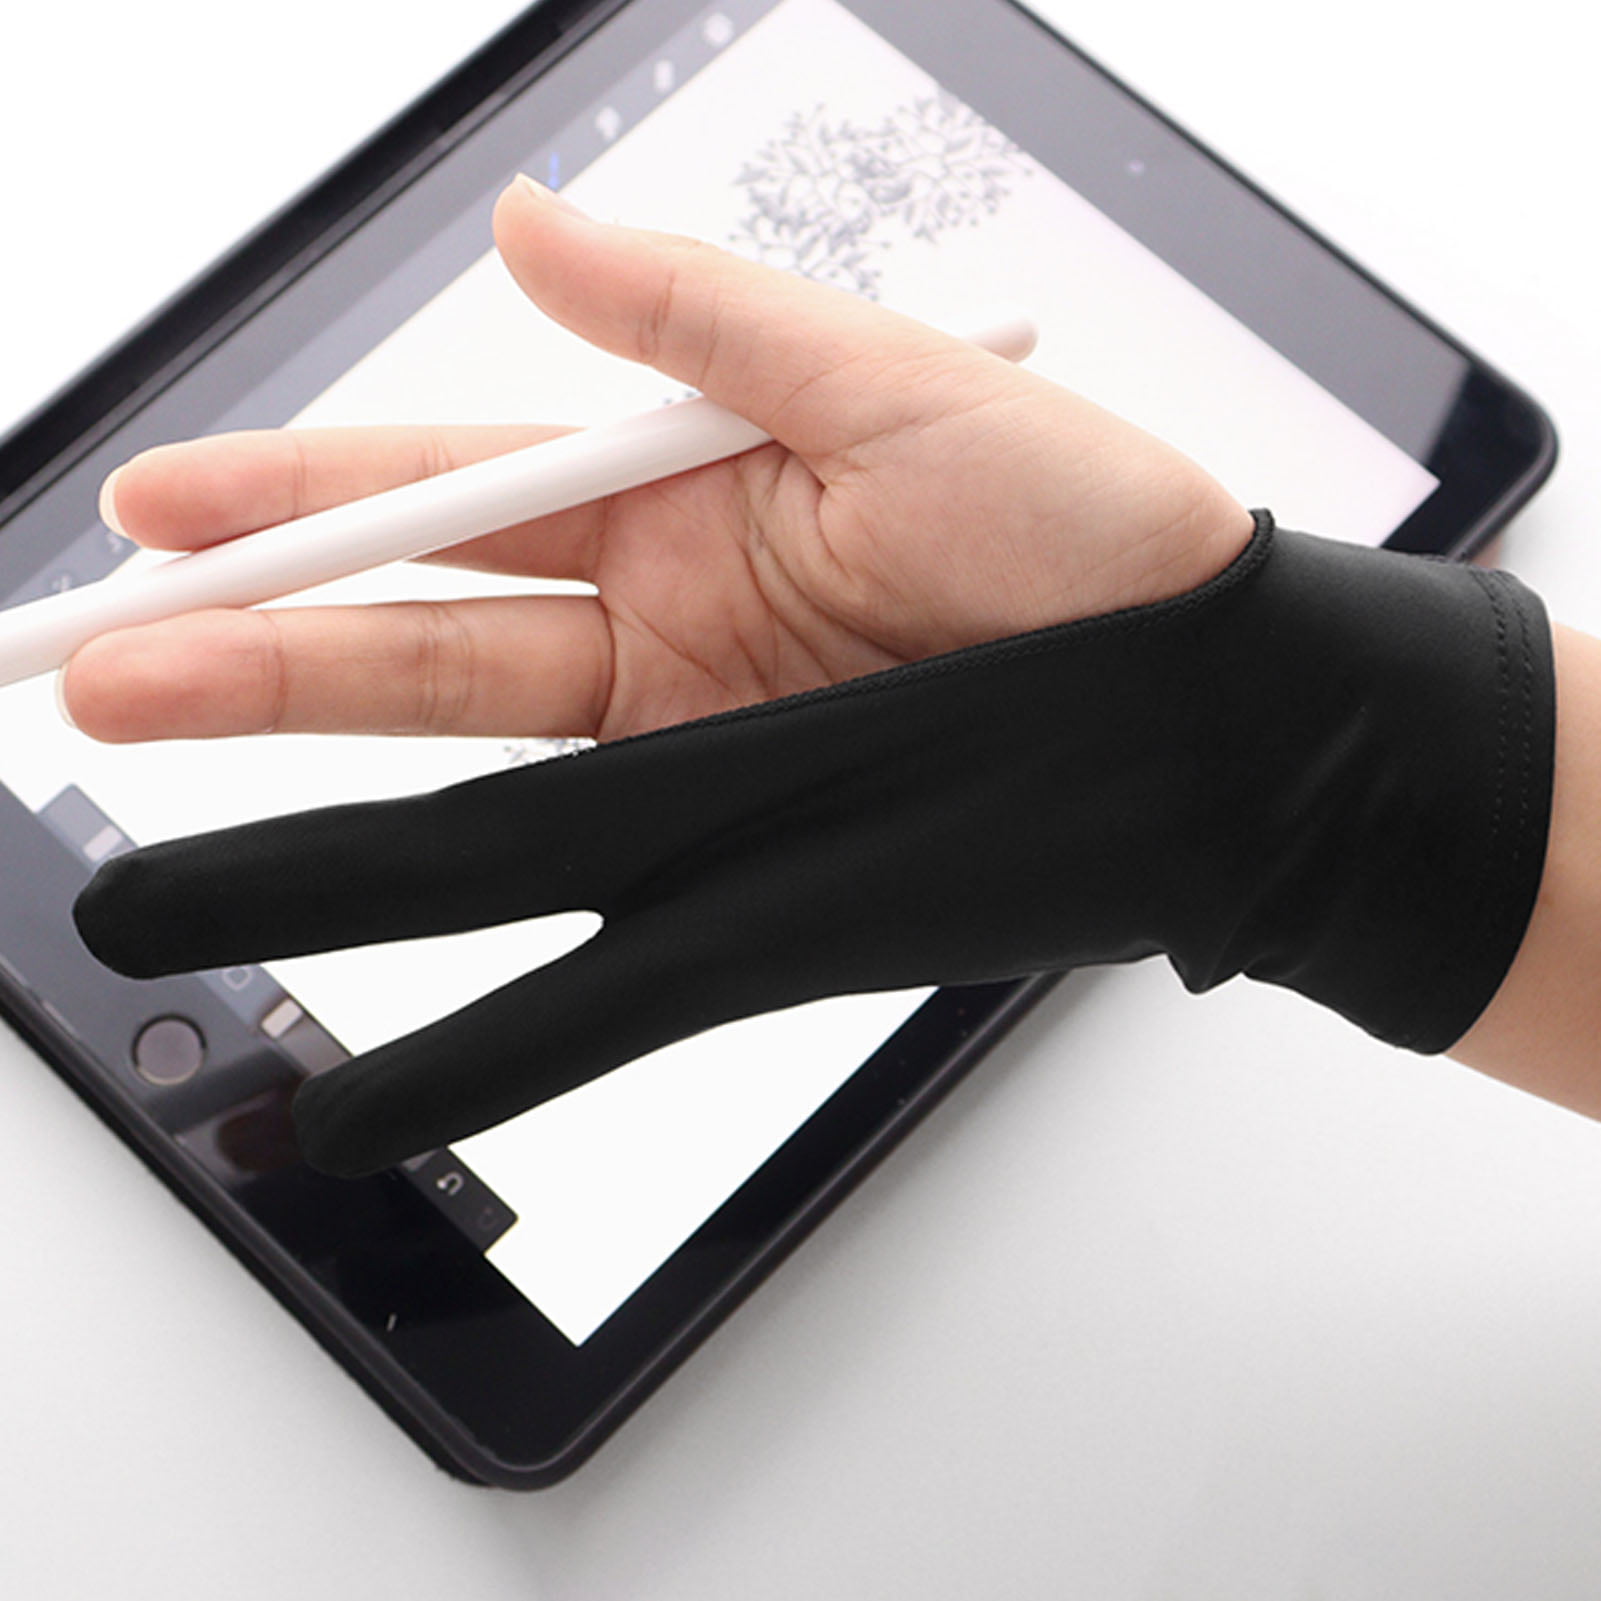 D-groee 1pc Artists Gloves - Palm Rejection Gloves with Two Fingers for Paper Sketching, iPad, Graphics Drawing Tablet, Suitable for Left and Right